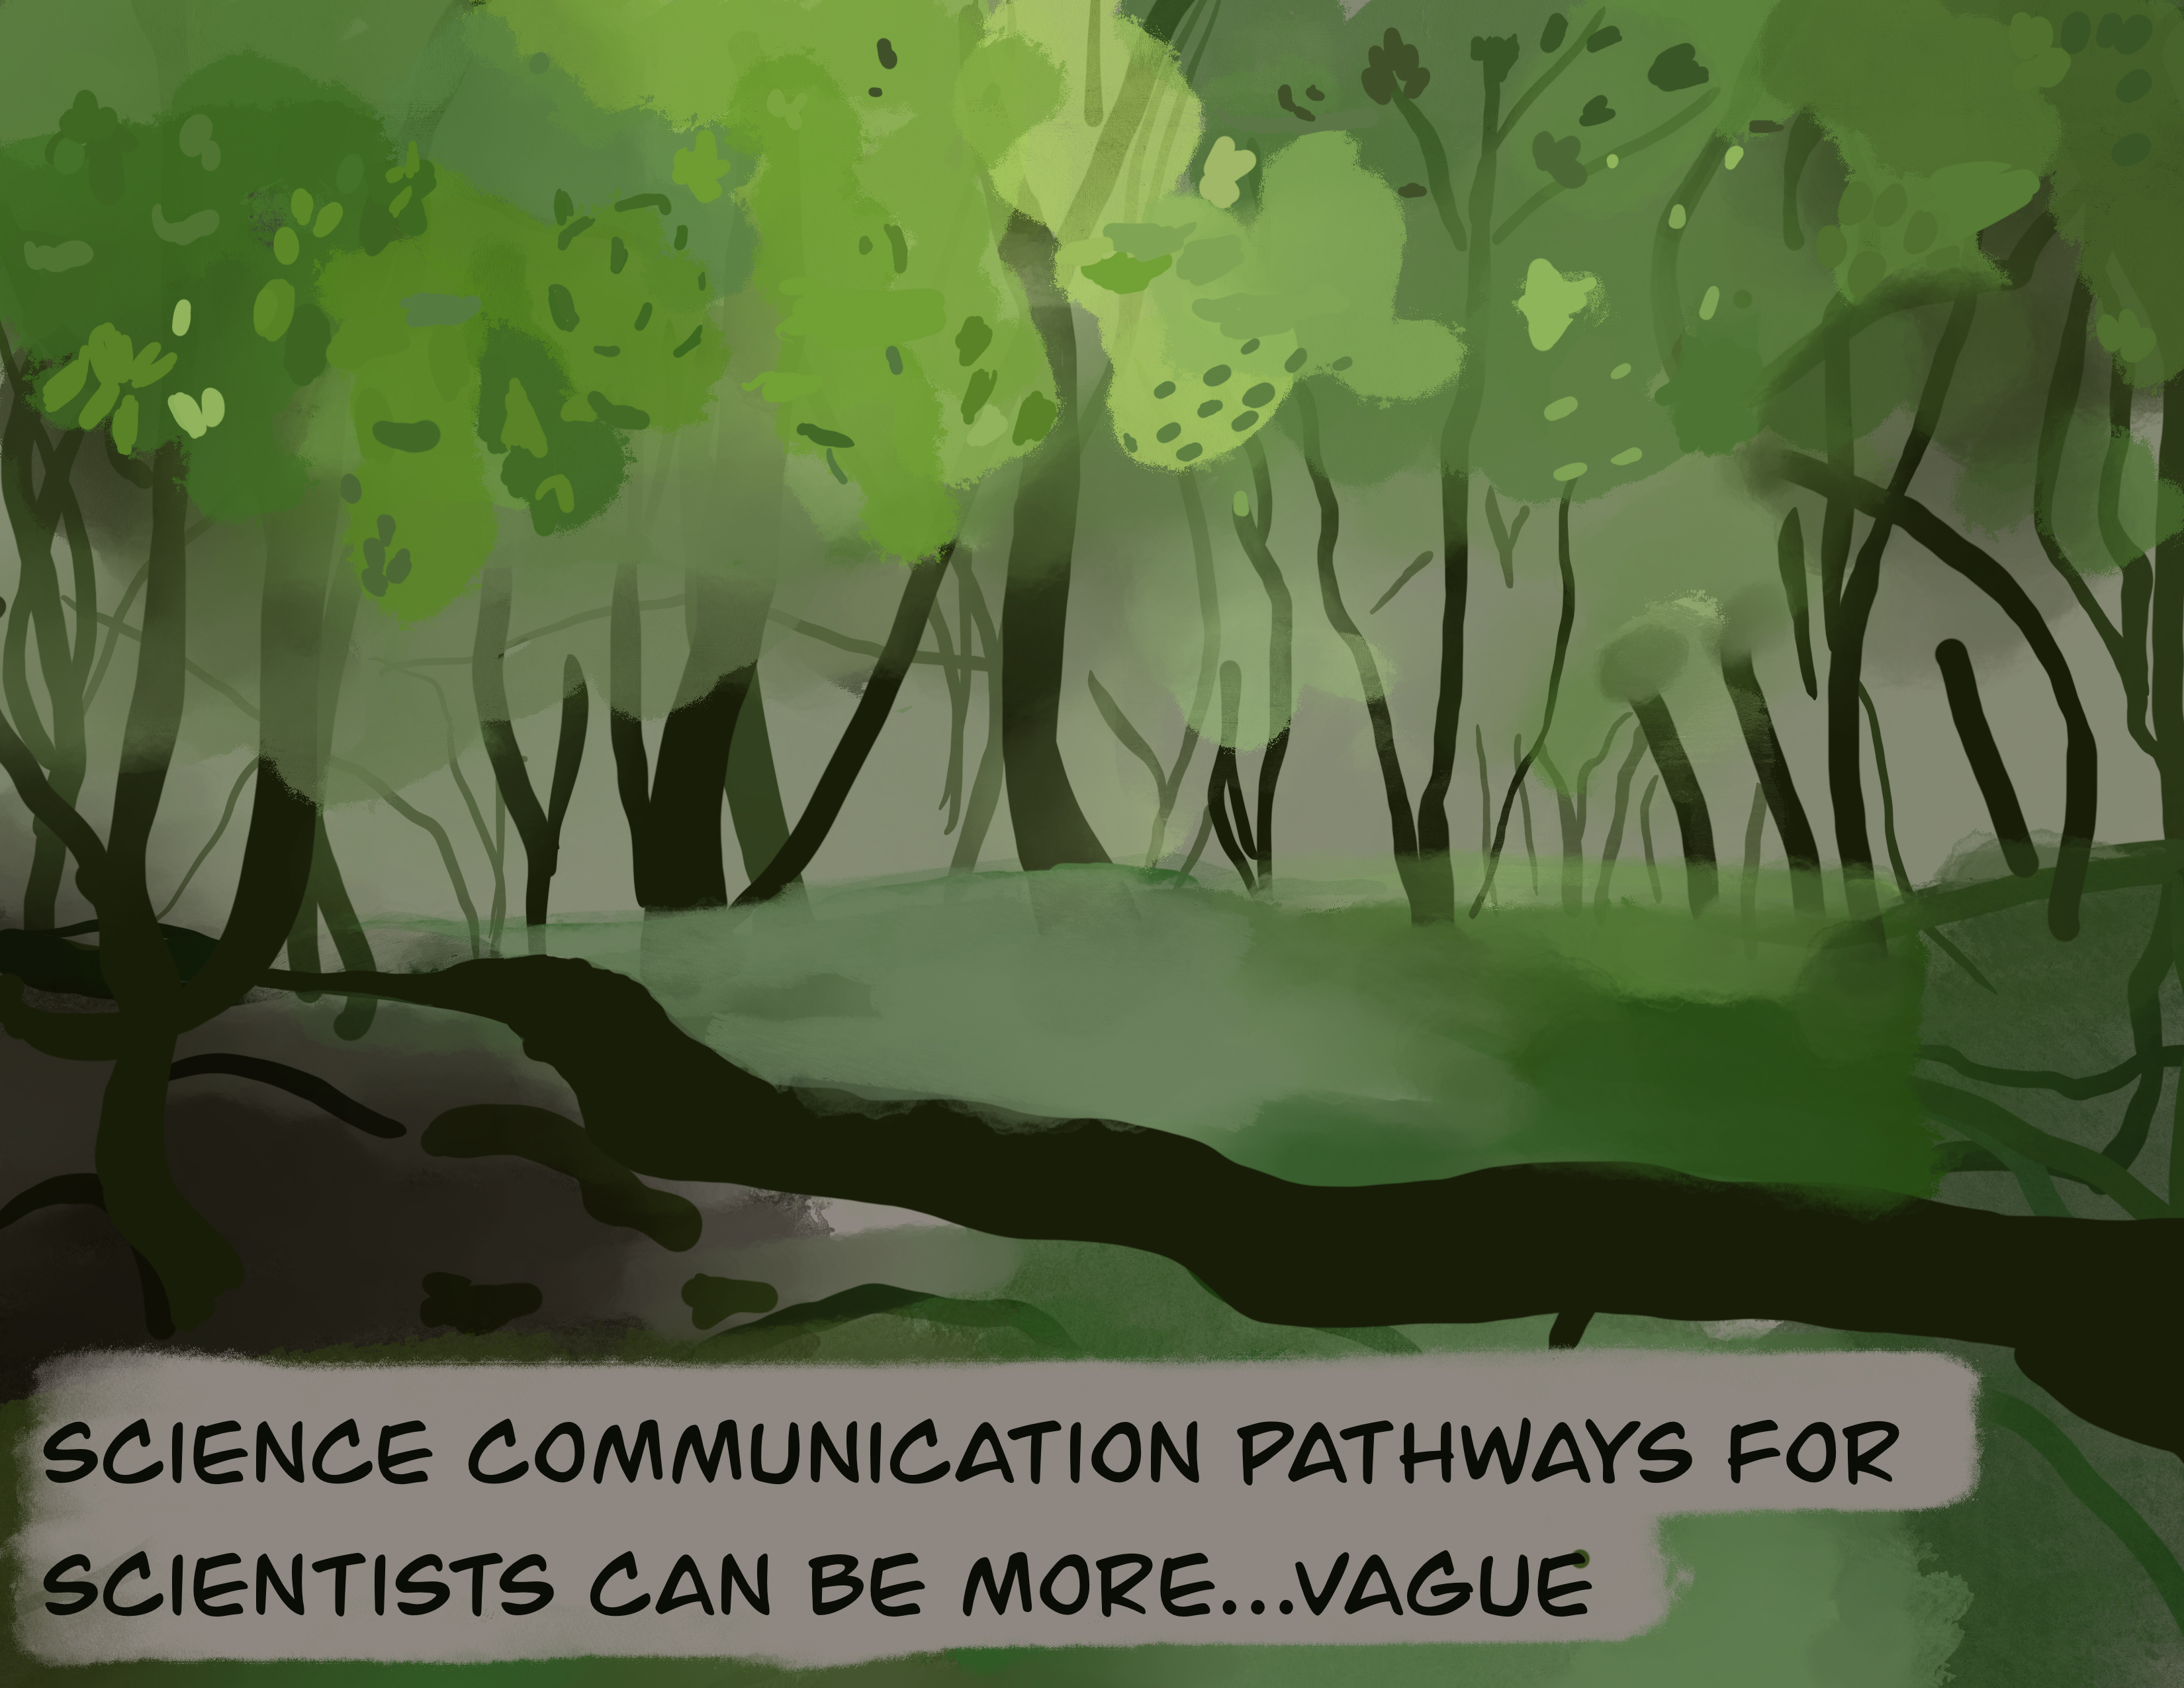 Science communication pathways for scientists can be more ... vague